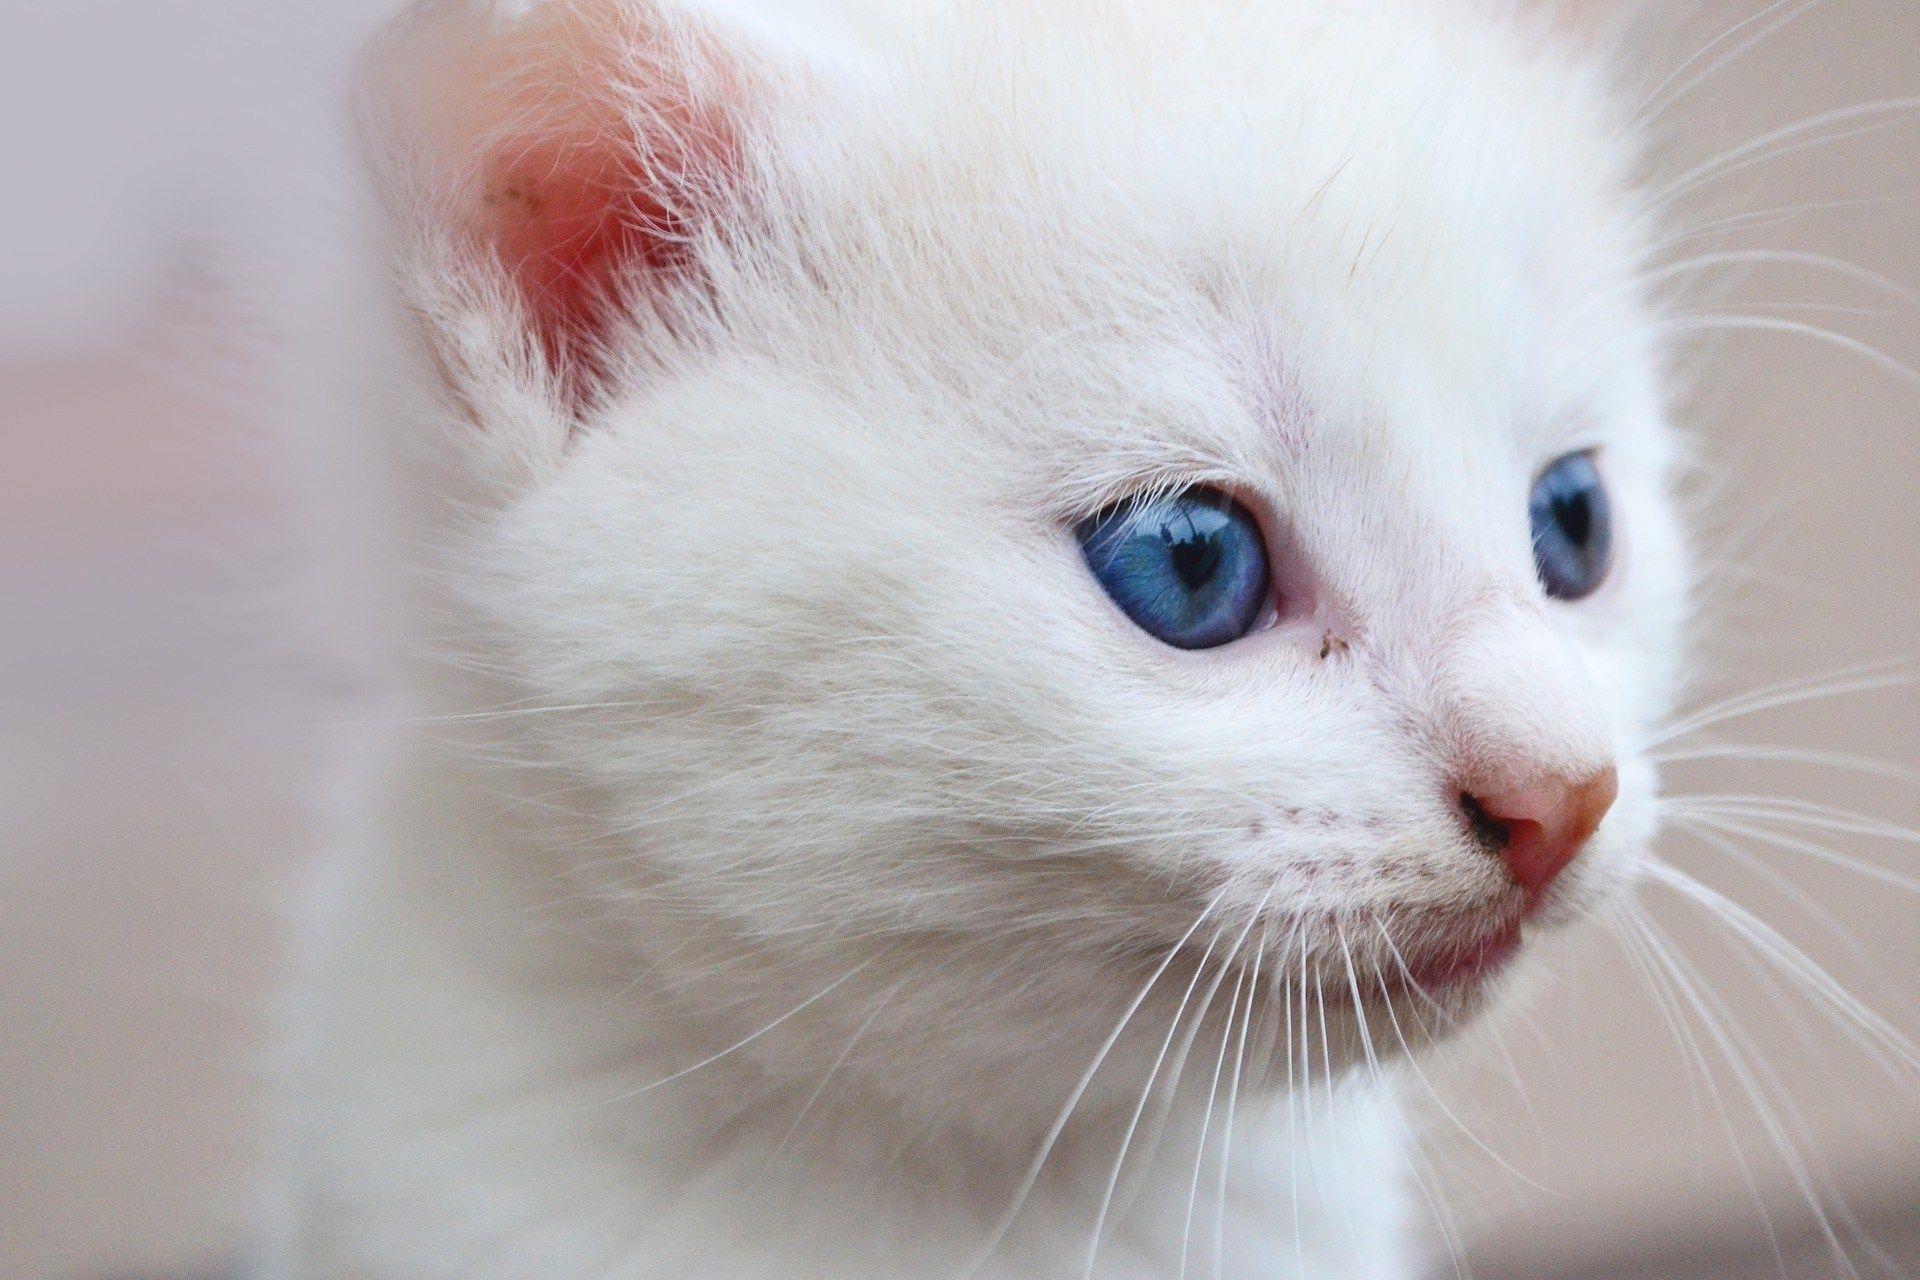 Blue and White Cat Logo - Did You Know That White Cats with Blue Eyes Are Deaf